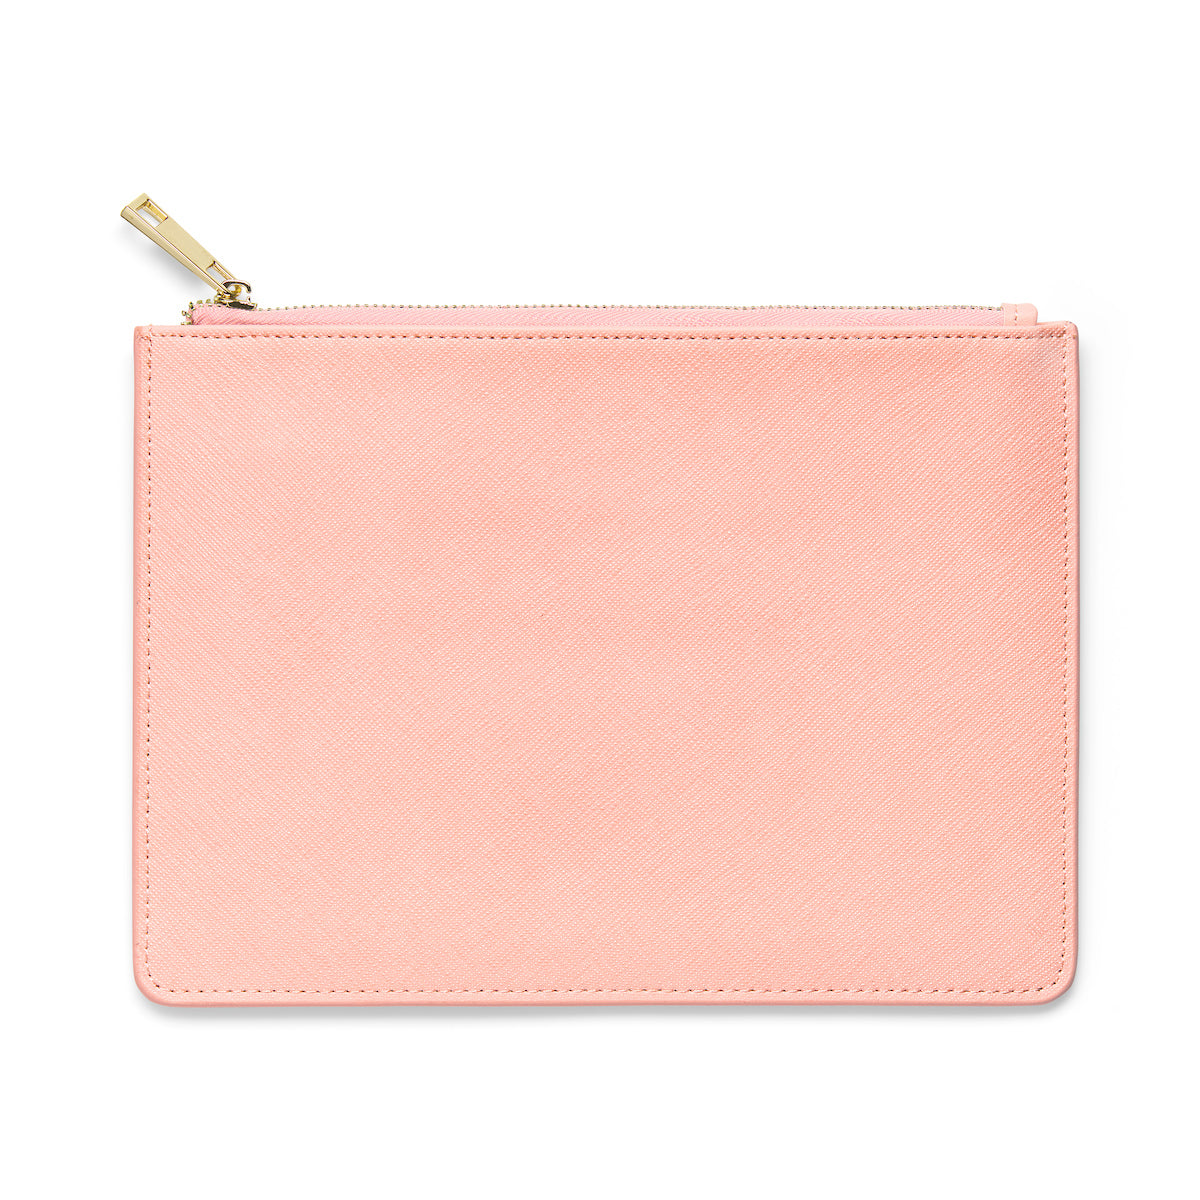 Large Saffiano Leather Clutch - Pale Pink